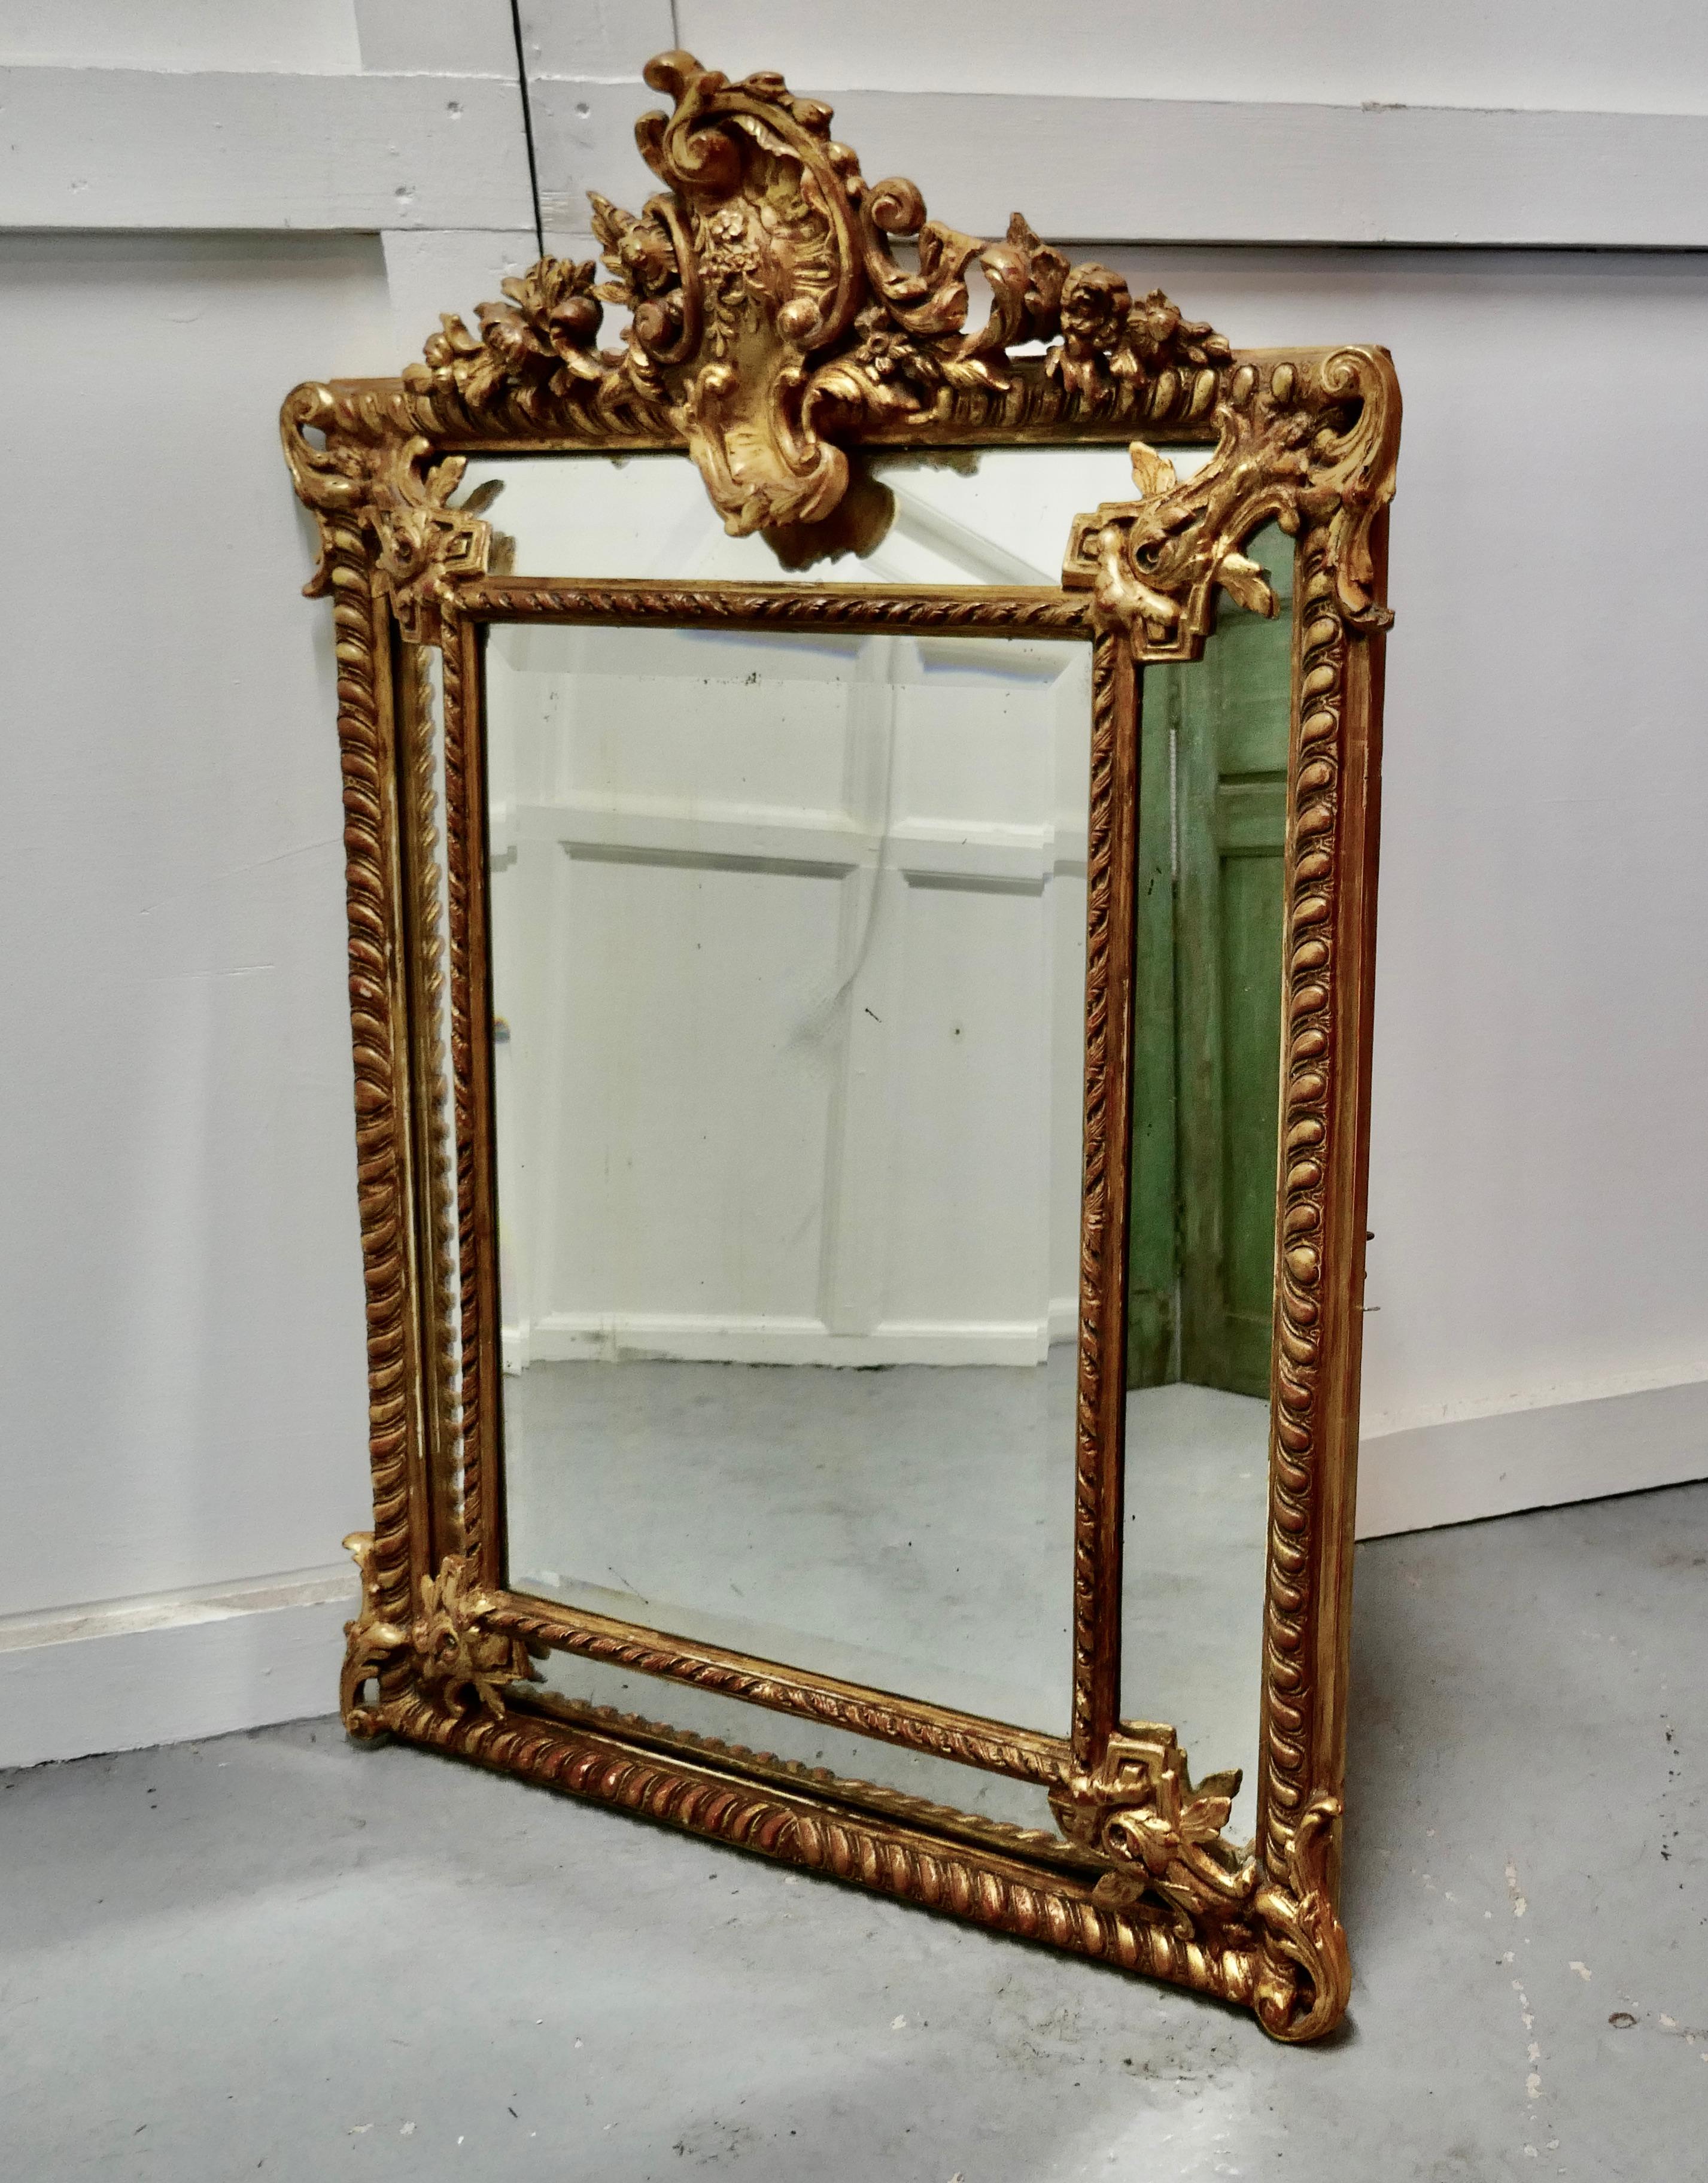 A stunning Napoleon III French cushion mirror

This is an exquisite piece a fine example of mirrors of this type, the centre glass is framed with smaller angled mirrors all around 

There is an elaborate gesso and gilt shell crest on the top of